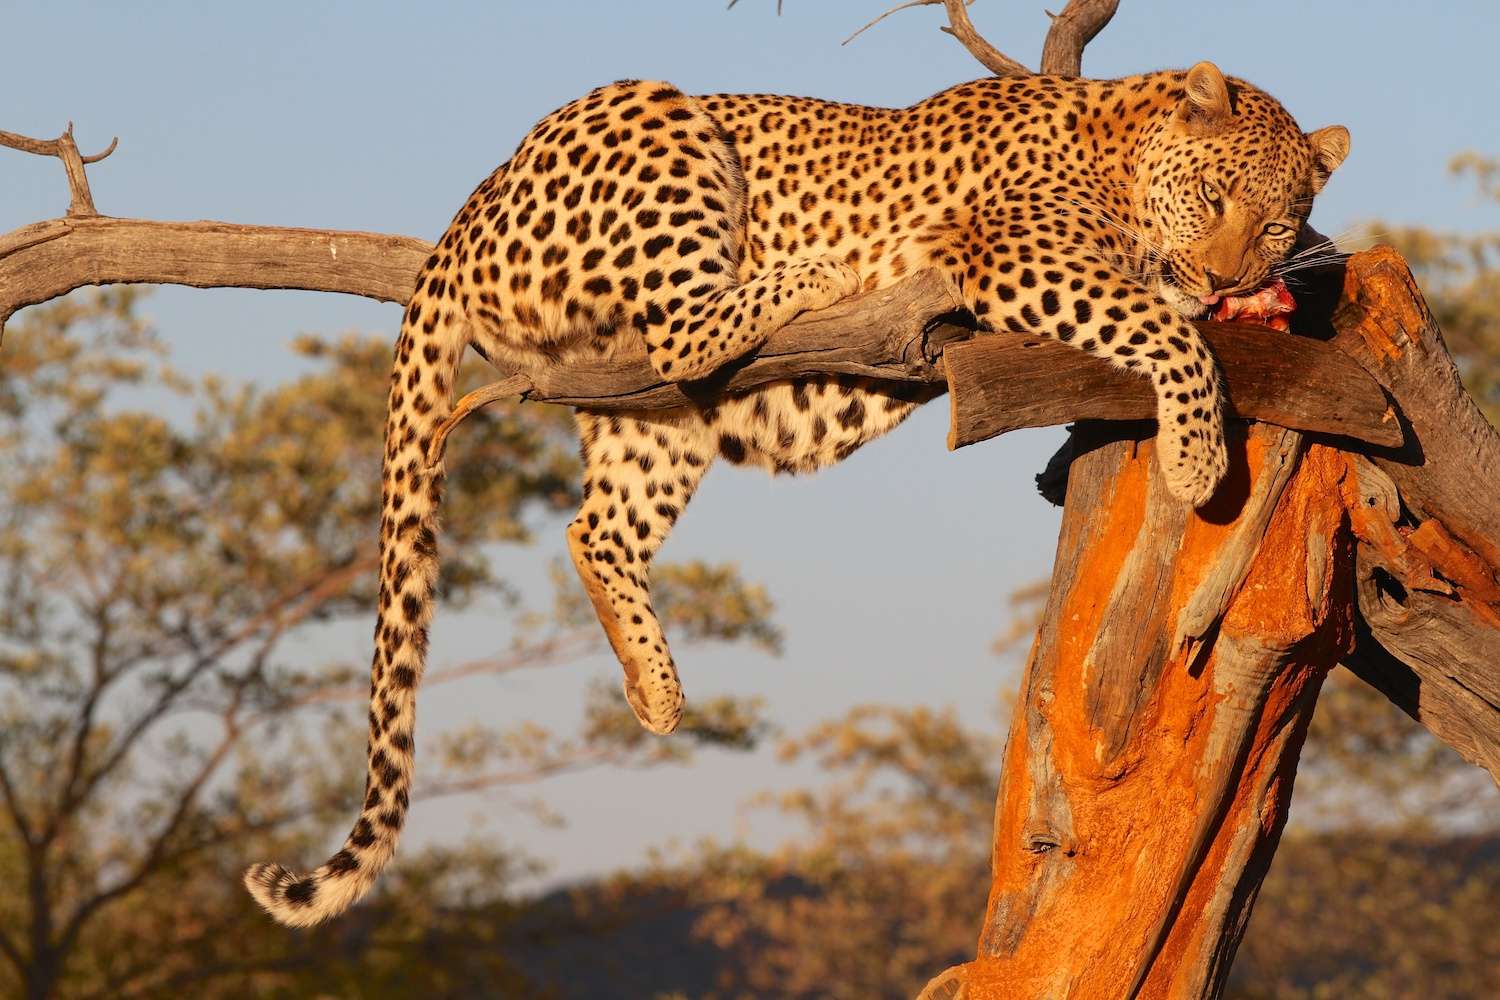 A Leopard in Namibia a tree eating meat.